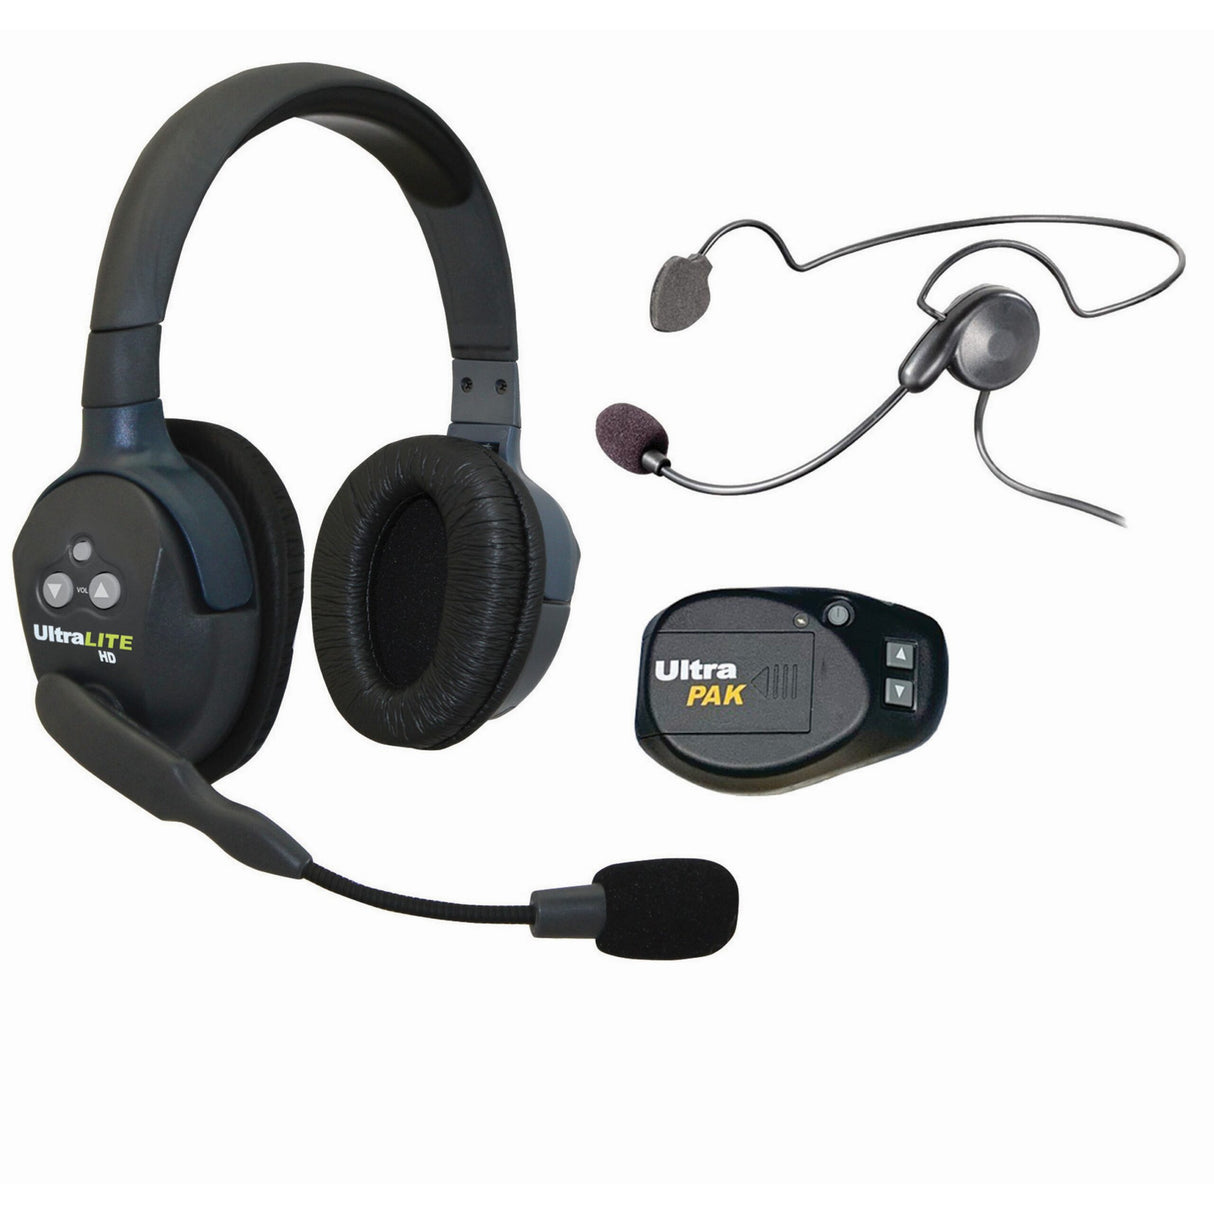 Eartec DMCYB5 1 Double MAIN UltraLITE and 4 Cyber/UltraPAK Headsets